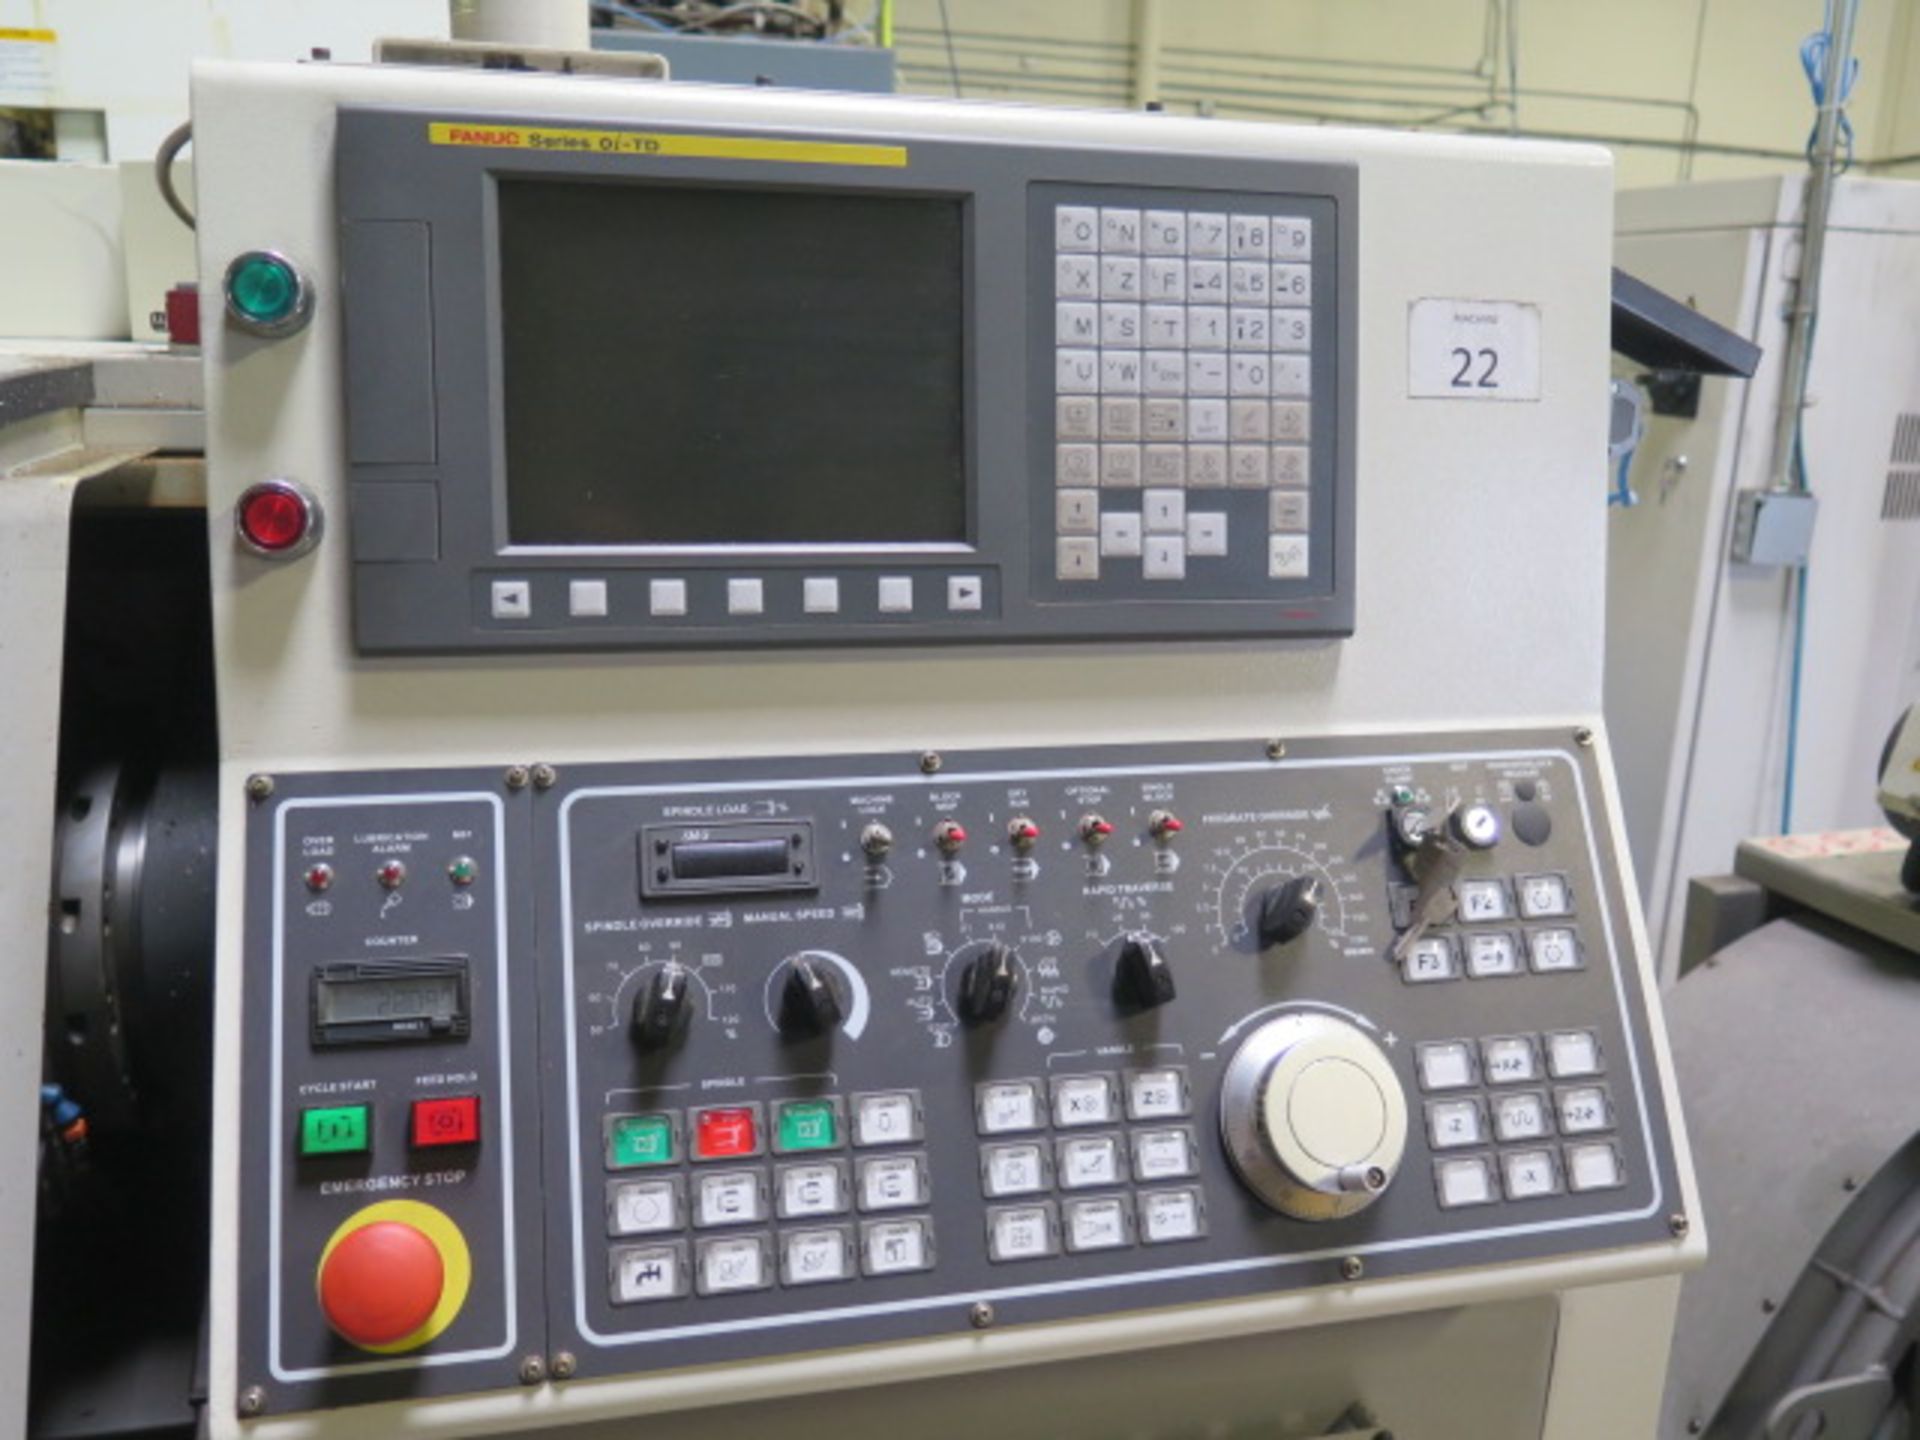 2014 Femco HL-25N CNC Lathe r s/n L114-2104 w/ Fanuc 0i-TD Controls, Tool Presetter, SOLD AS IS - Image 10 of 14